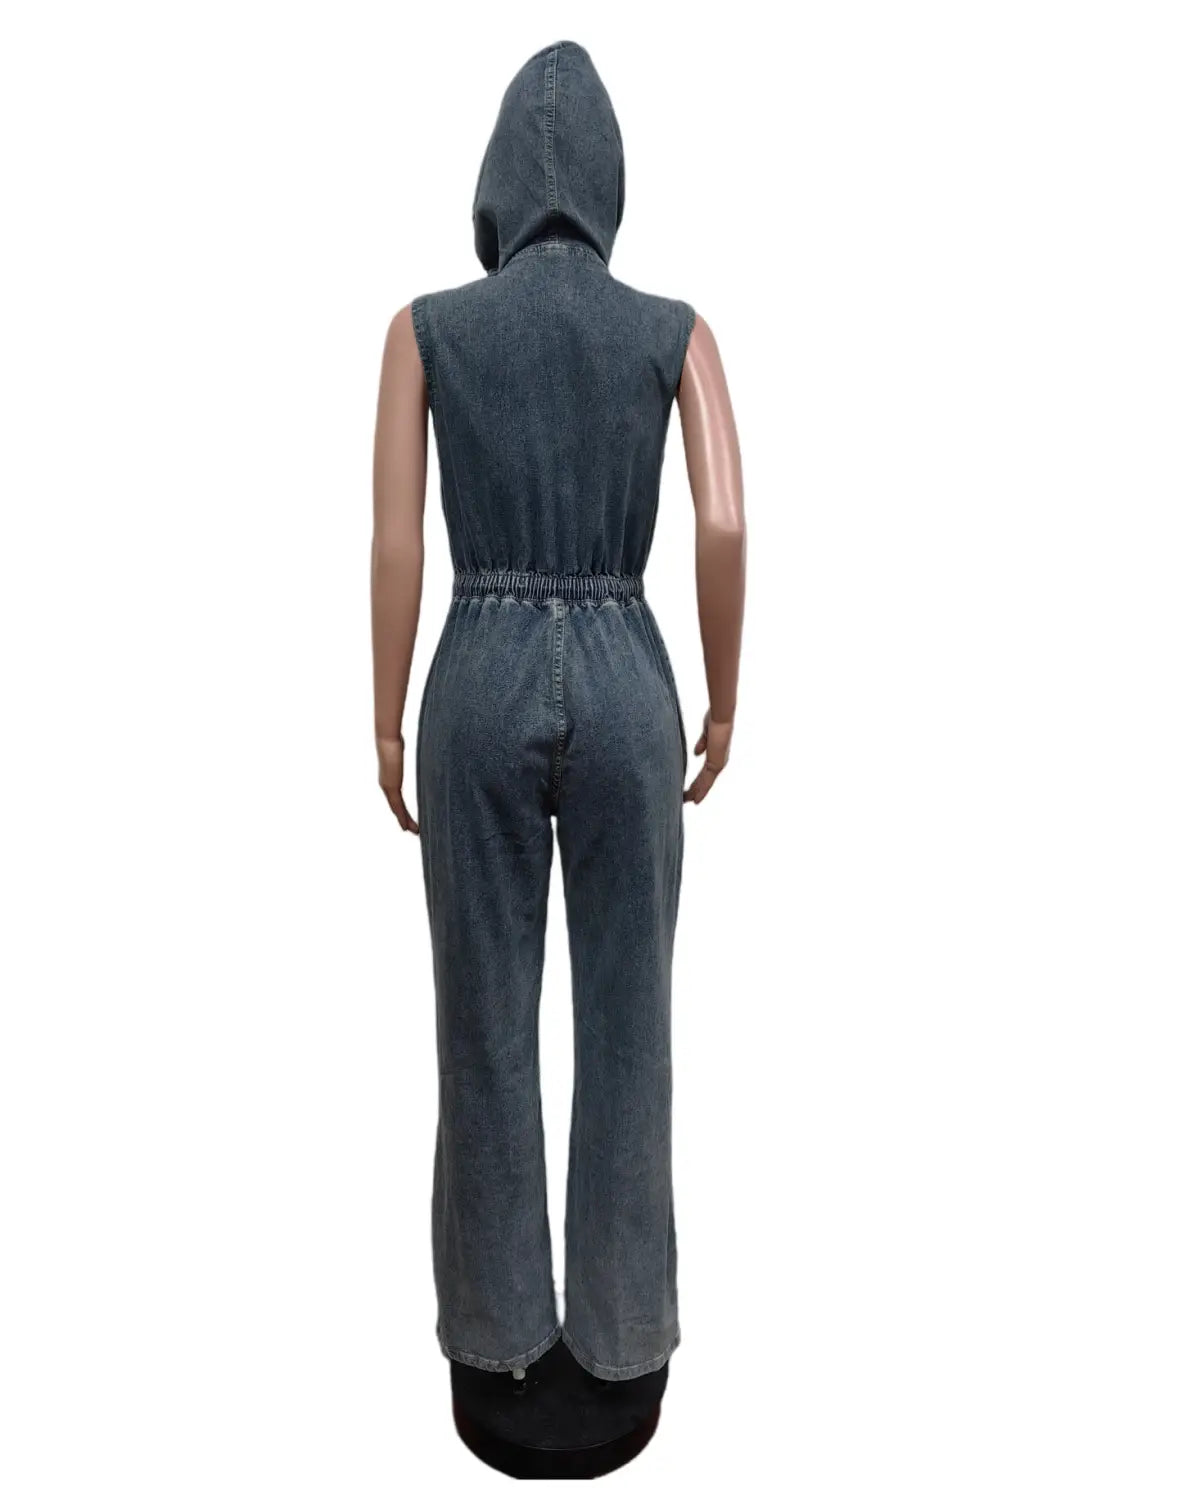 Hooded One Piece Overalls - Casual Stretch Retro Jumpsuit